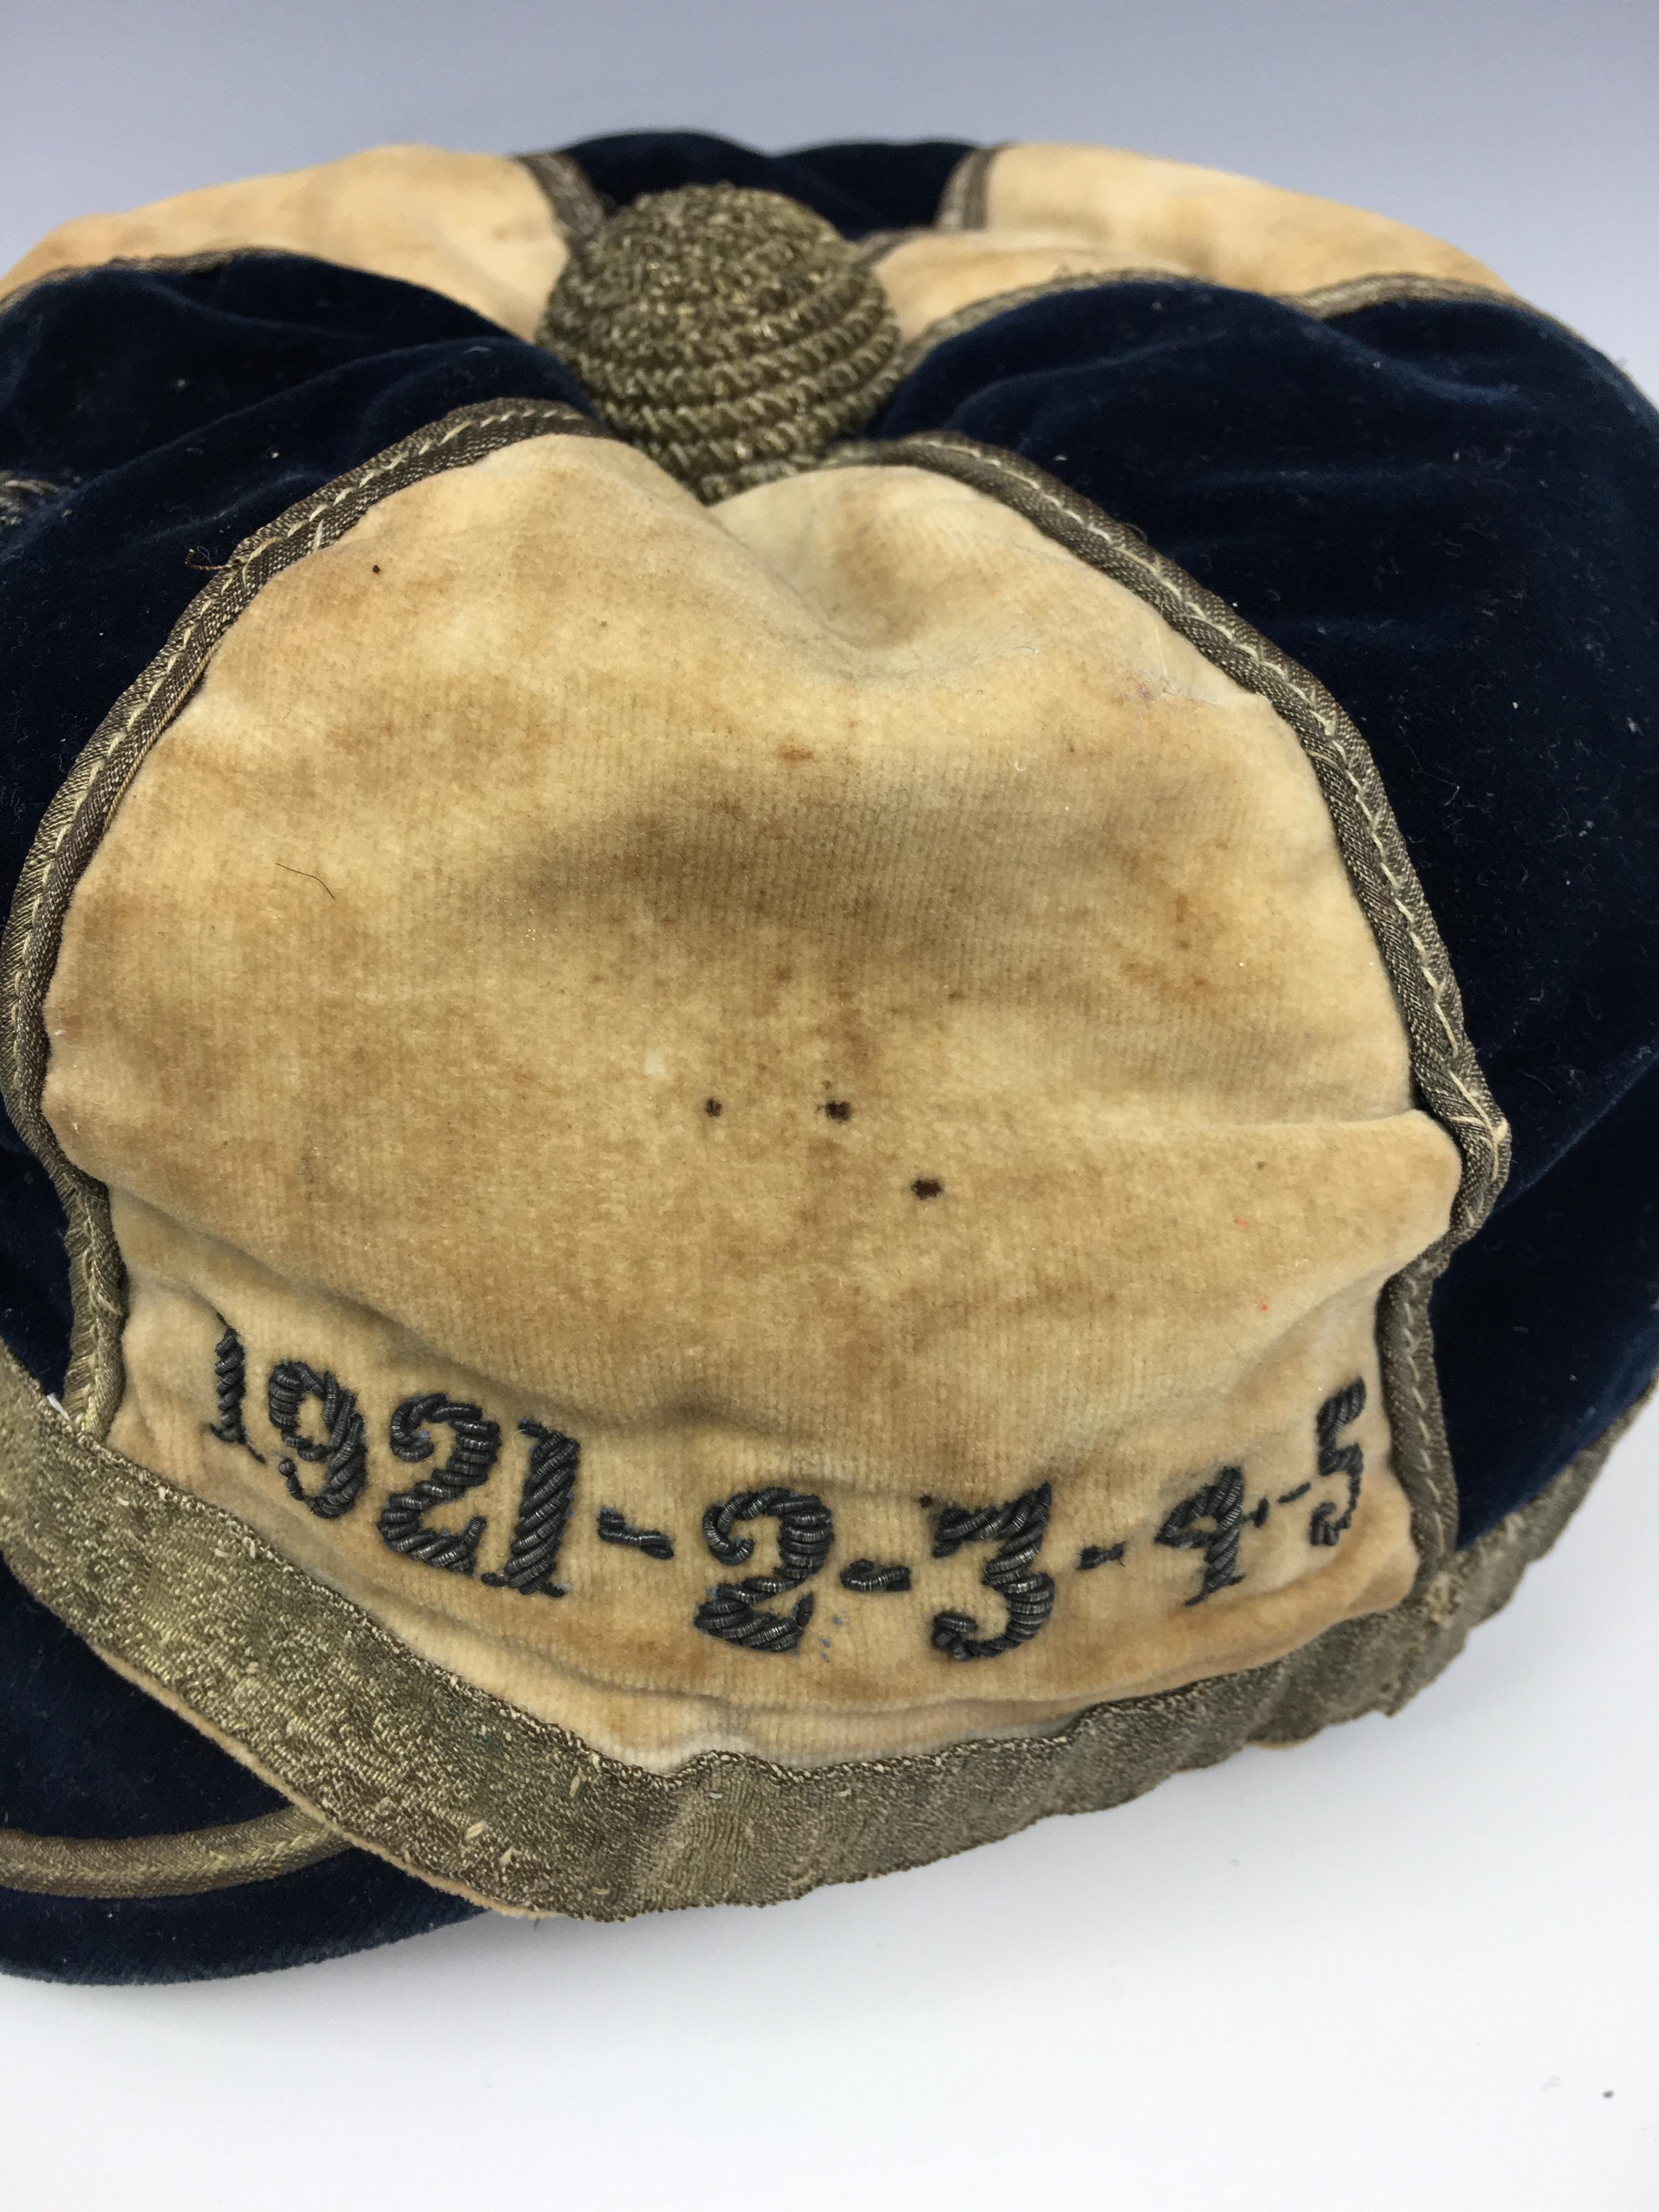 Two extremely rare 1920 ' ALDERNEY ' Muratti caps - Channel Islands football interest - Centenary - Image 4 of 9